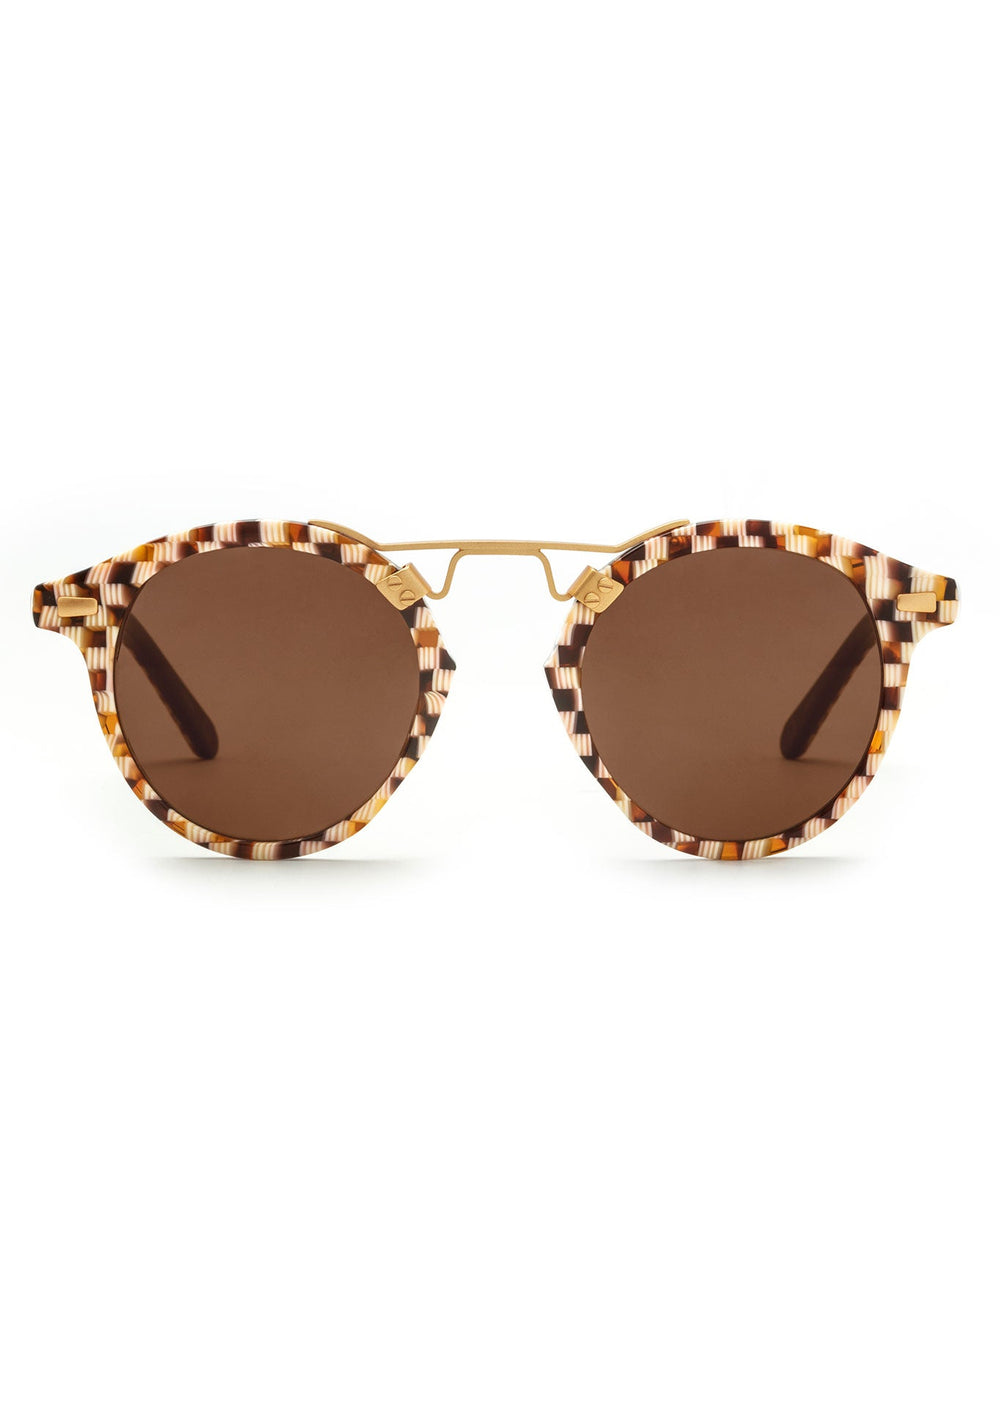 KREWE ST. LOUIS CLASSICS | Caffe Dolce 24K Handcrafted, luxury, checkered acetate KREWE sunglasses